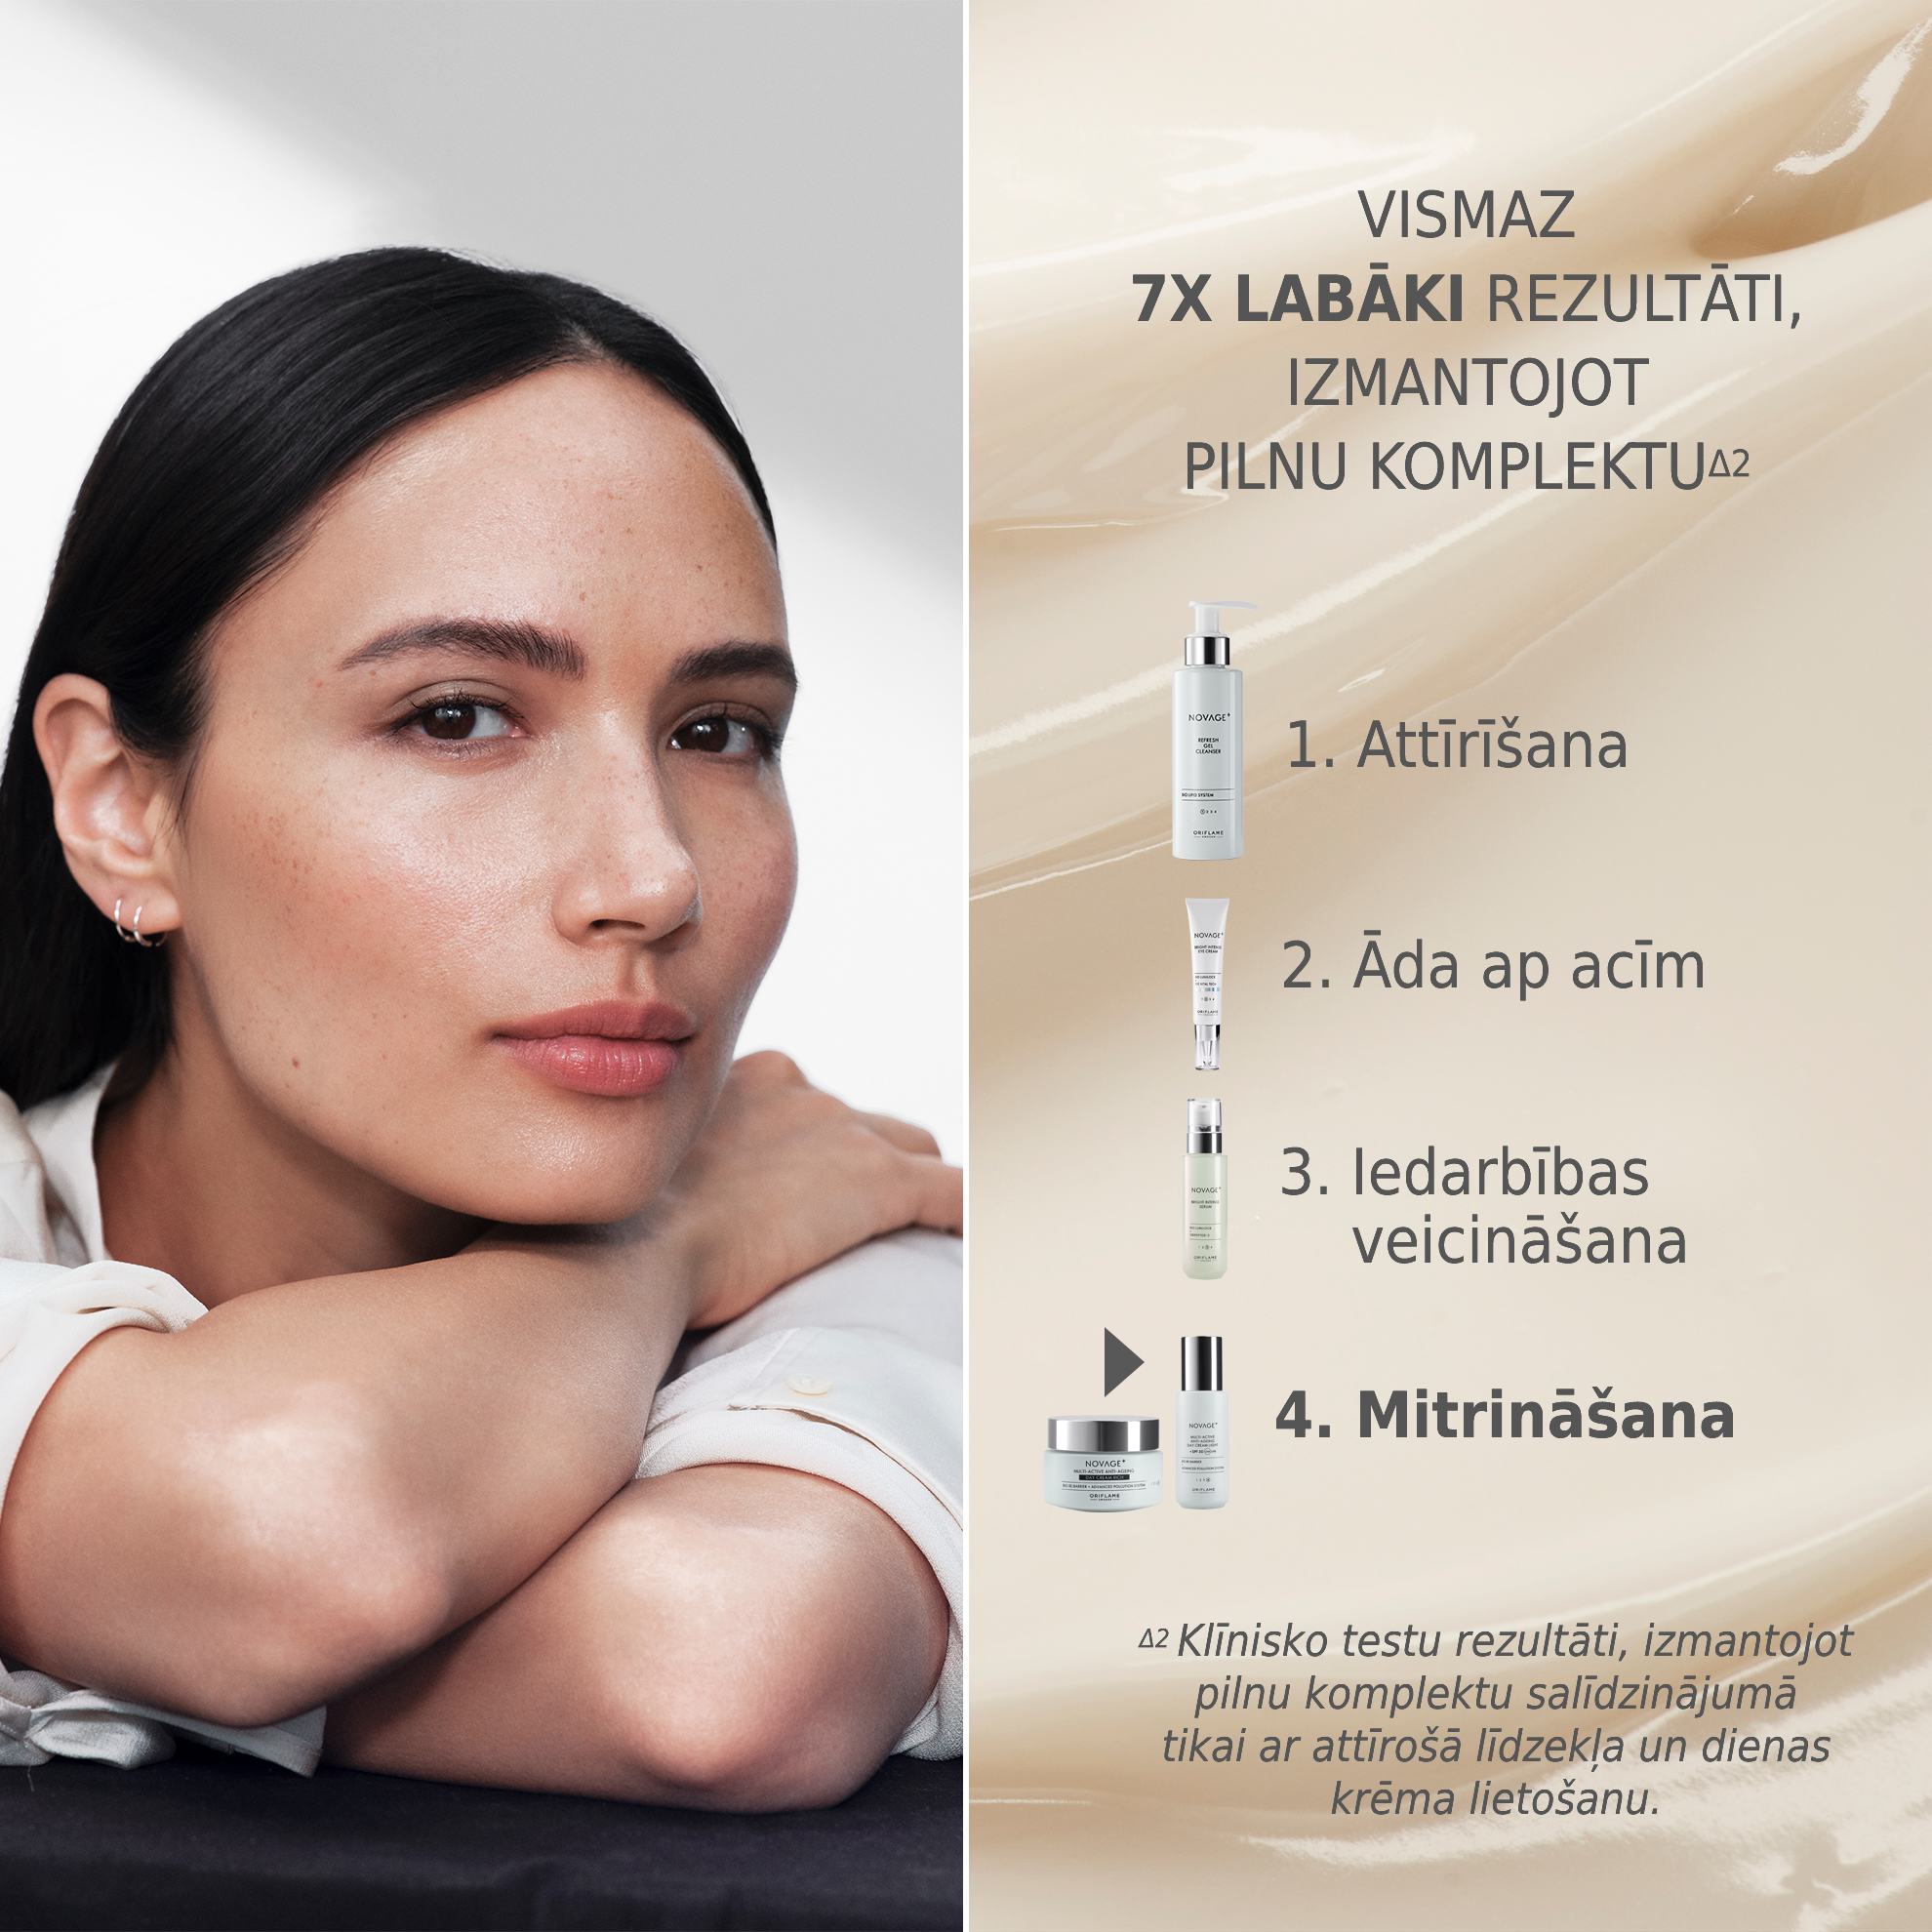 https://media-cdn.oriflame.com/productImage?externalMediaId=product-management-media%2fProducts%2f41047%2fLV%2f41047_4.png&id=17606068&version=2